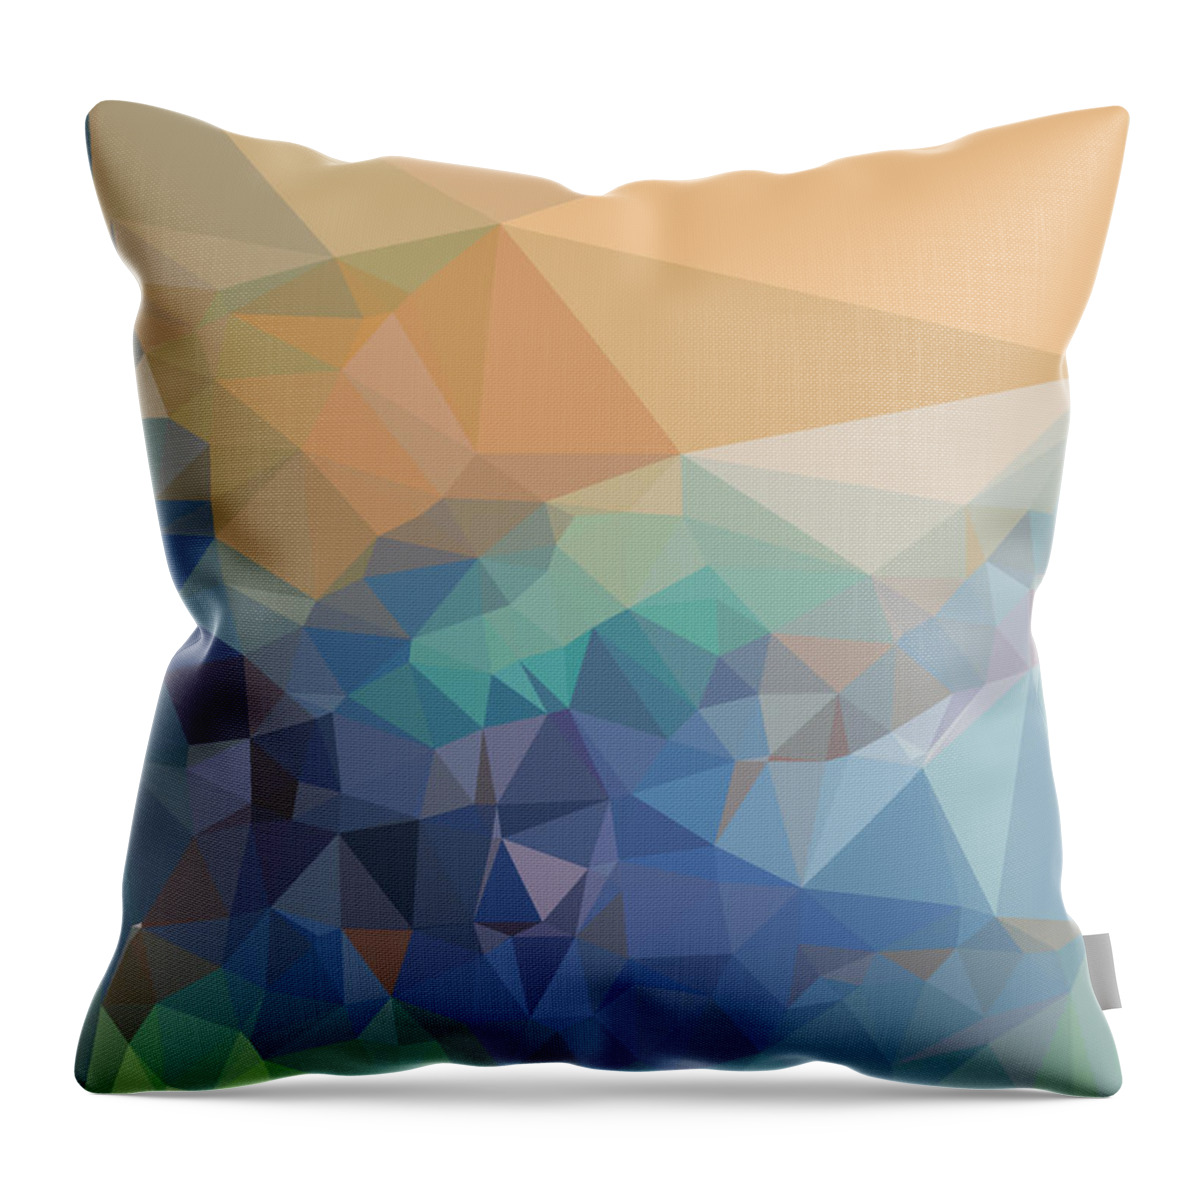 Drop Throw Pillow featuring the digital art New Year - Triangulation by Themayart